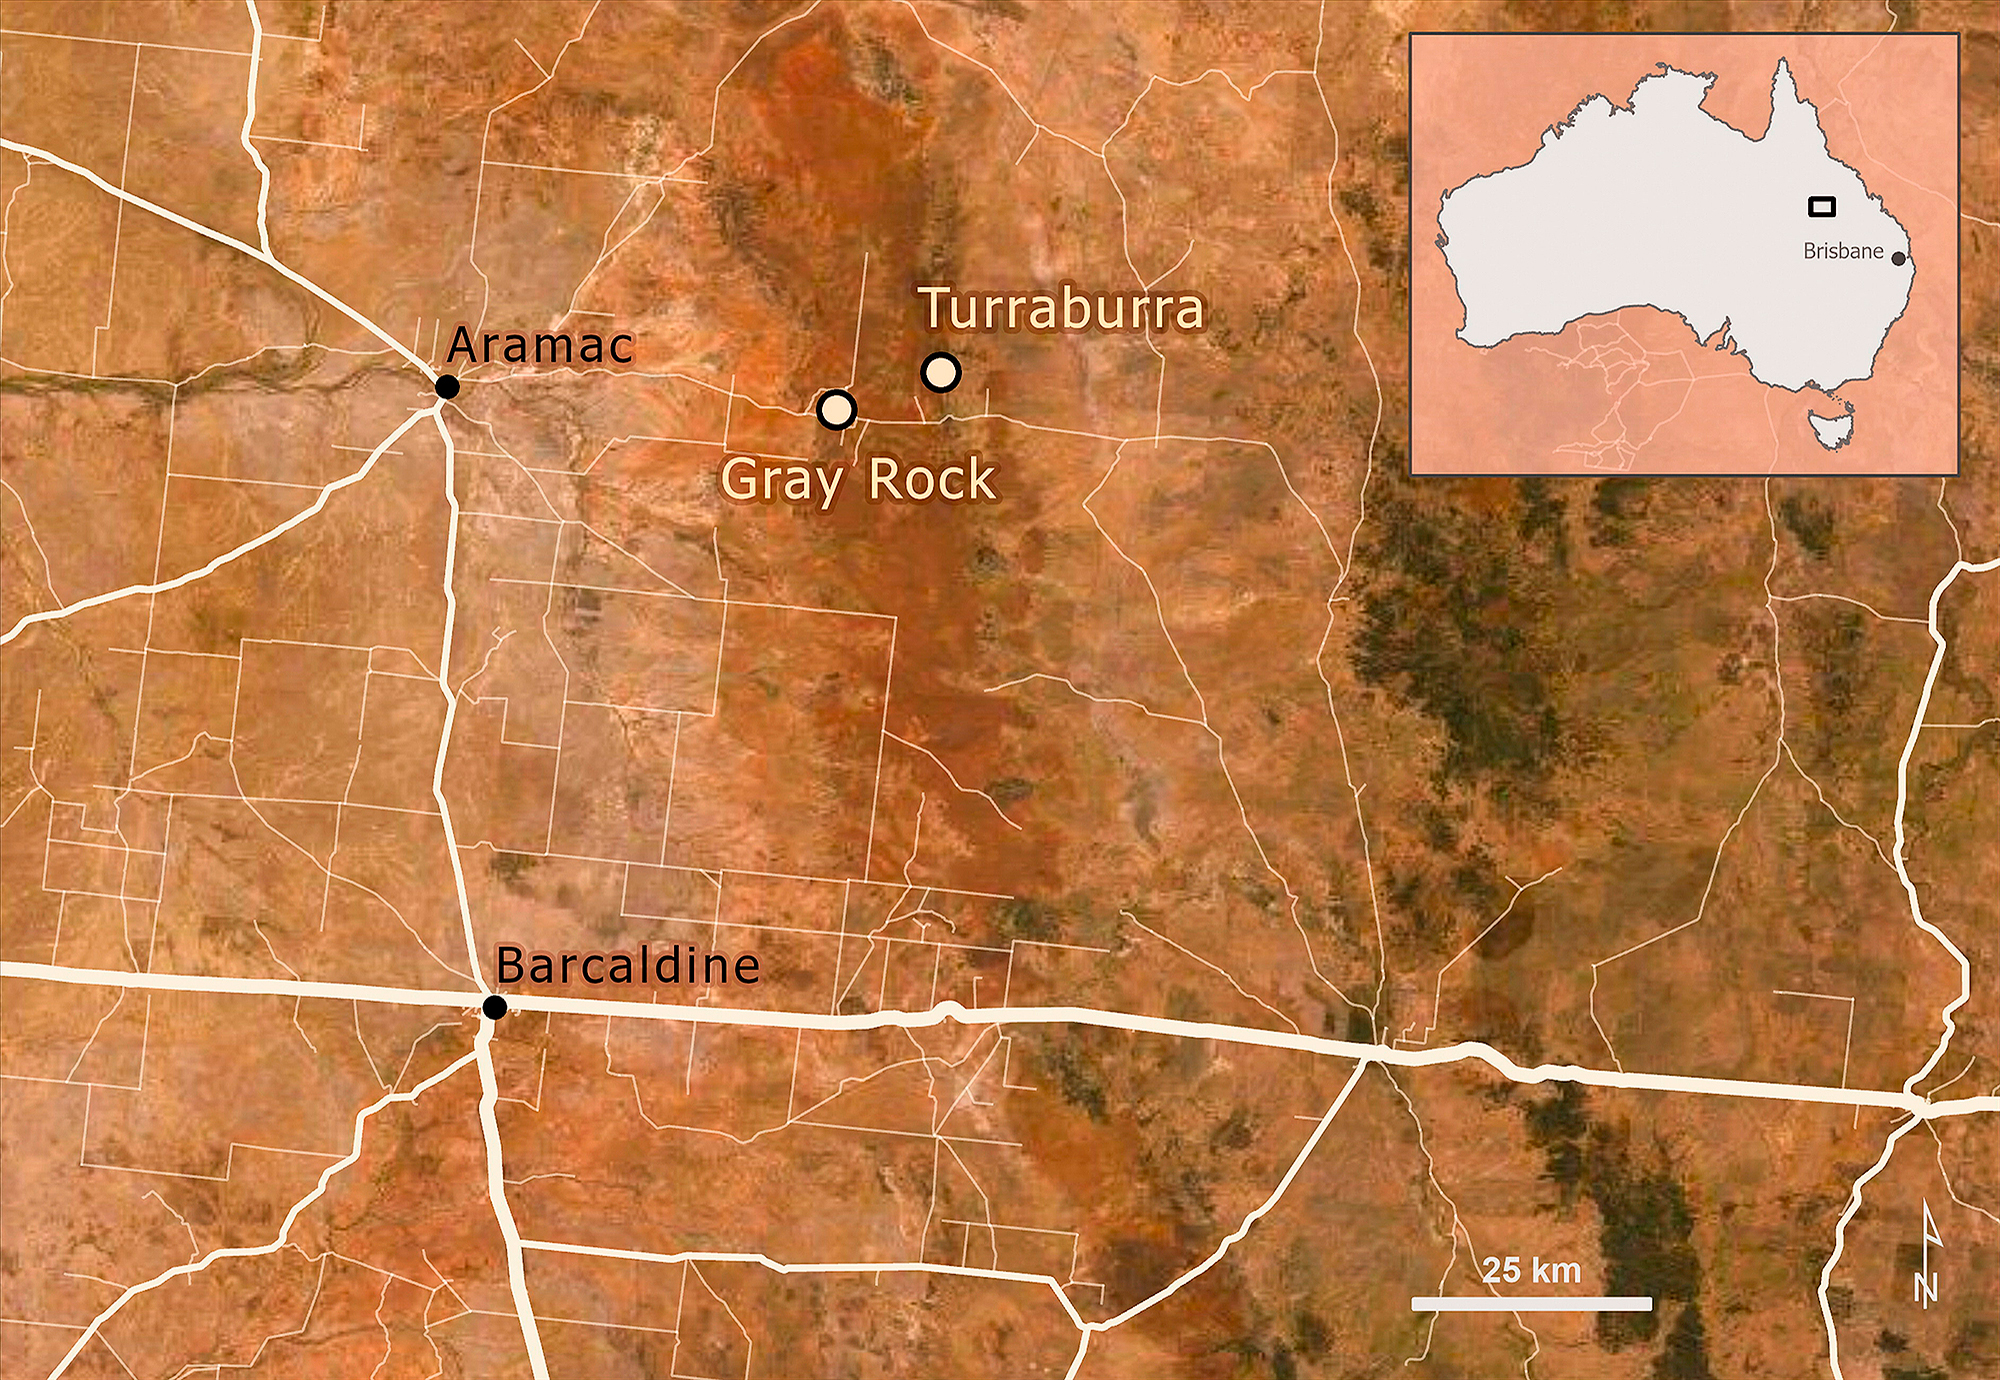 Map showing the location of Turraburra and neighbouring Grey Rock